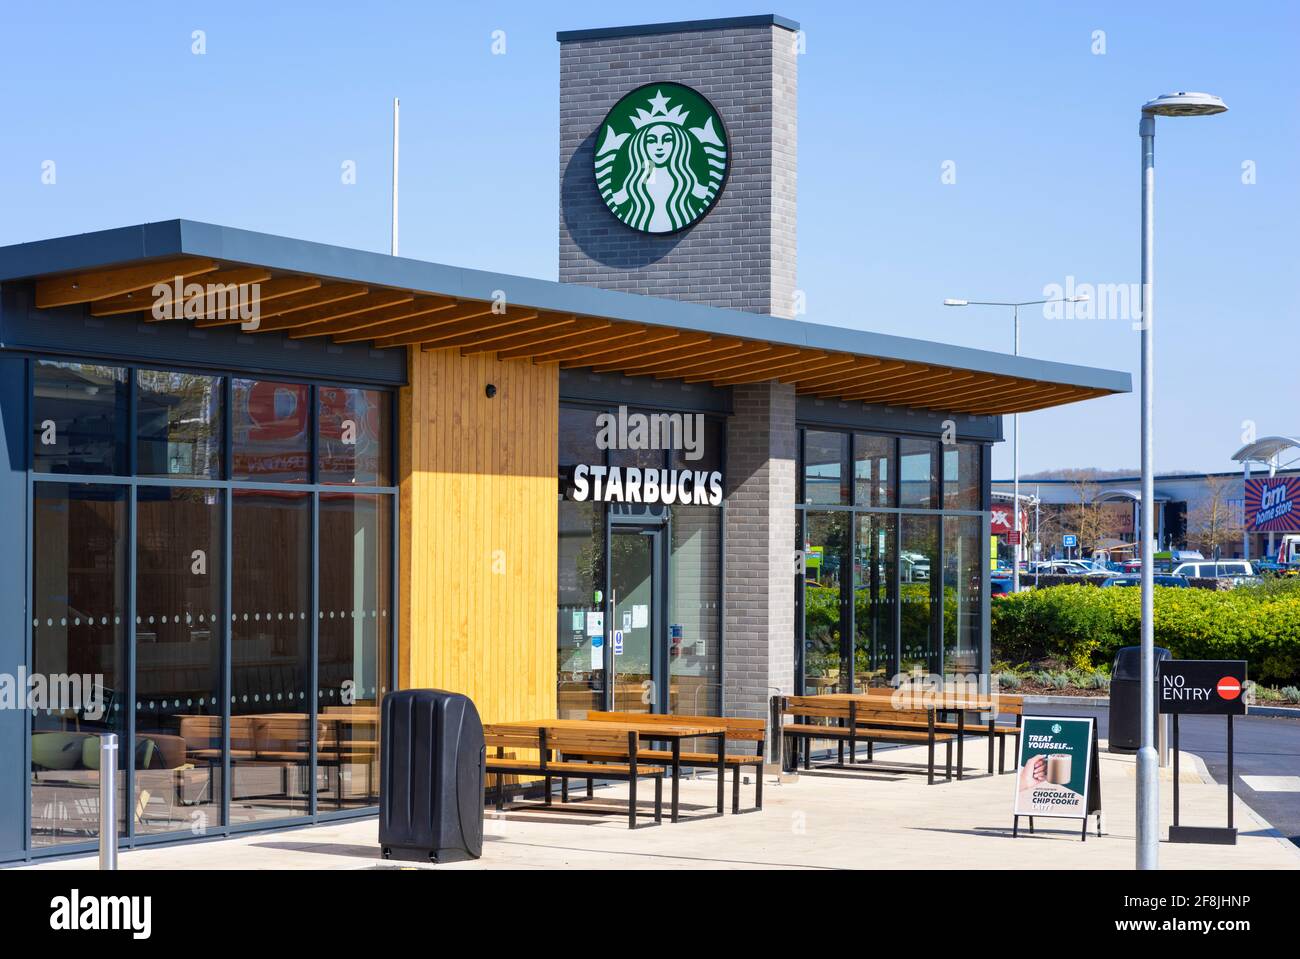 Starbucks cafe with outdoor seating Starbucks UK cafe and drive-thru Victoria retail park Netherfield Nottingham East mIdlands England GB UK Europe Stock Photo